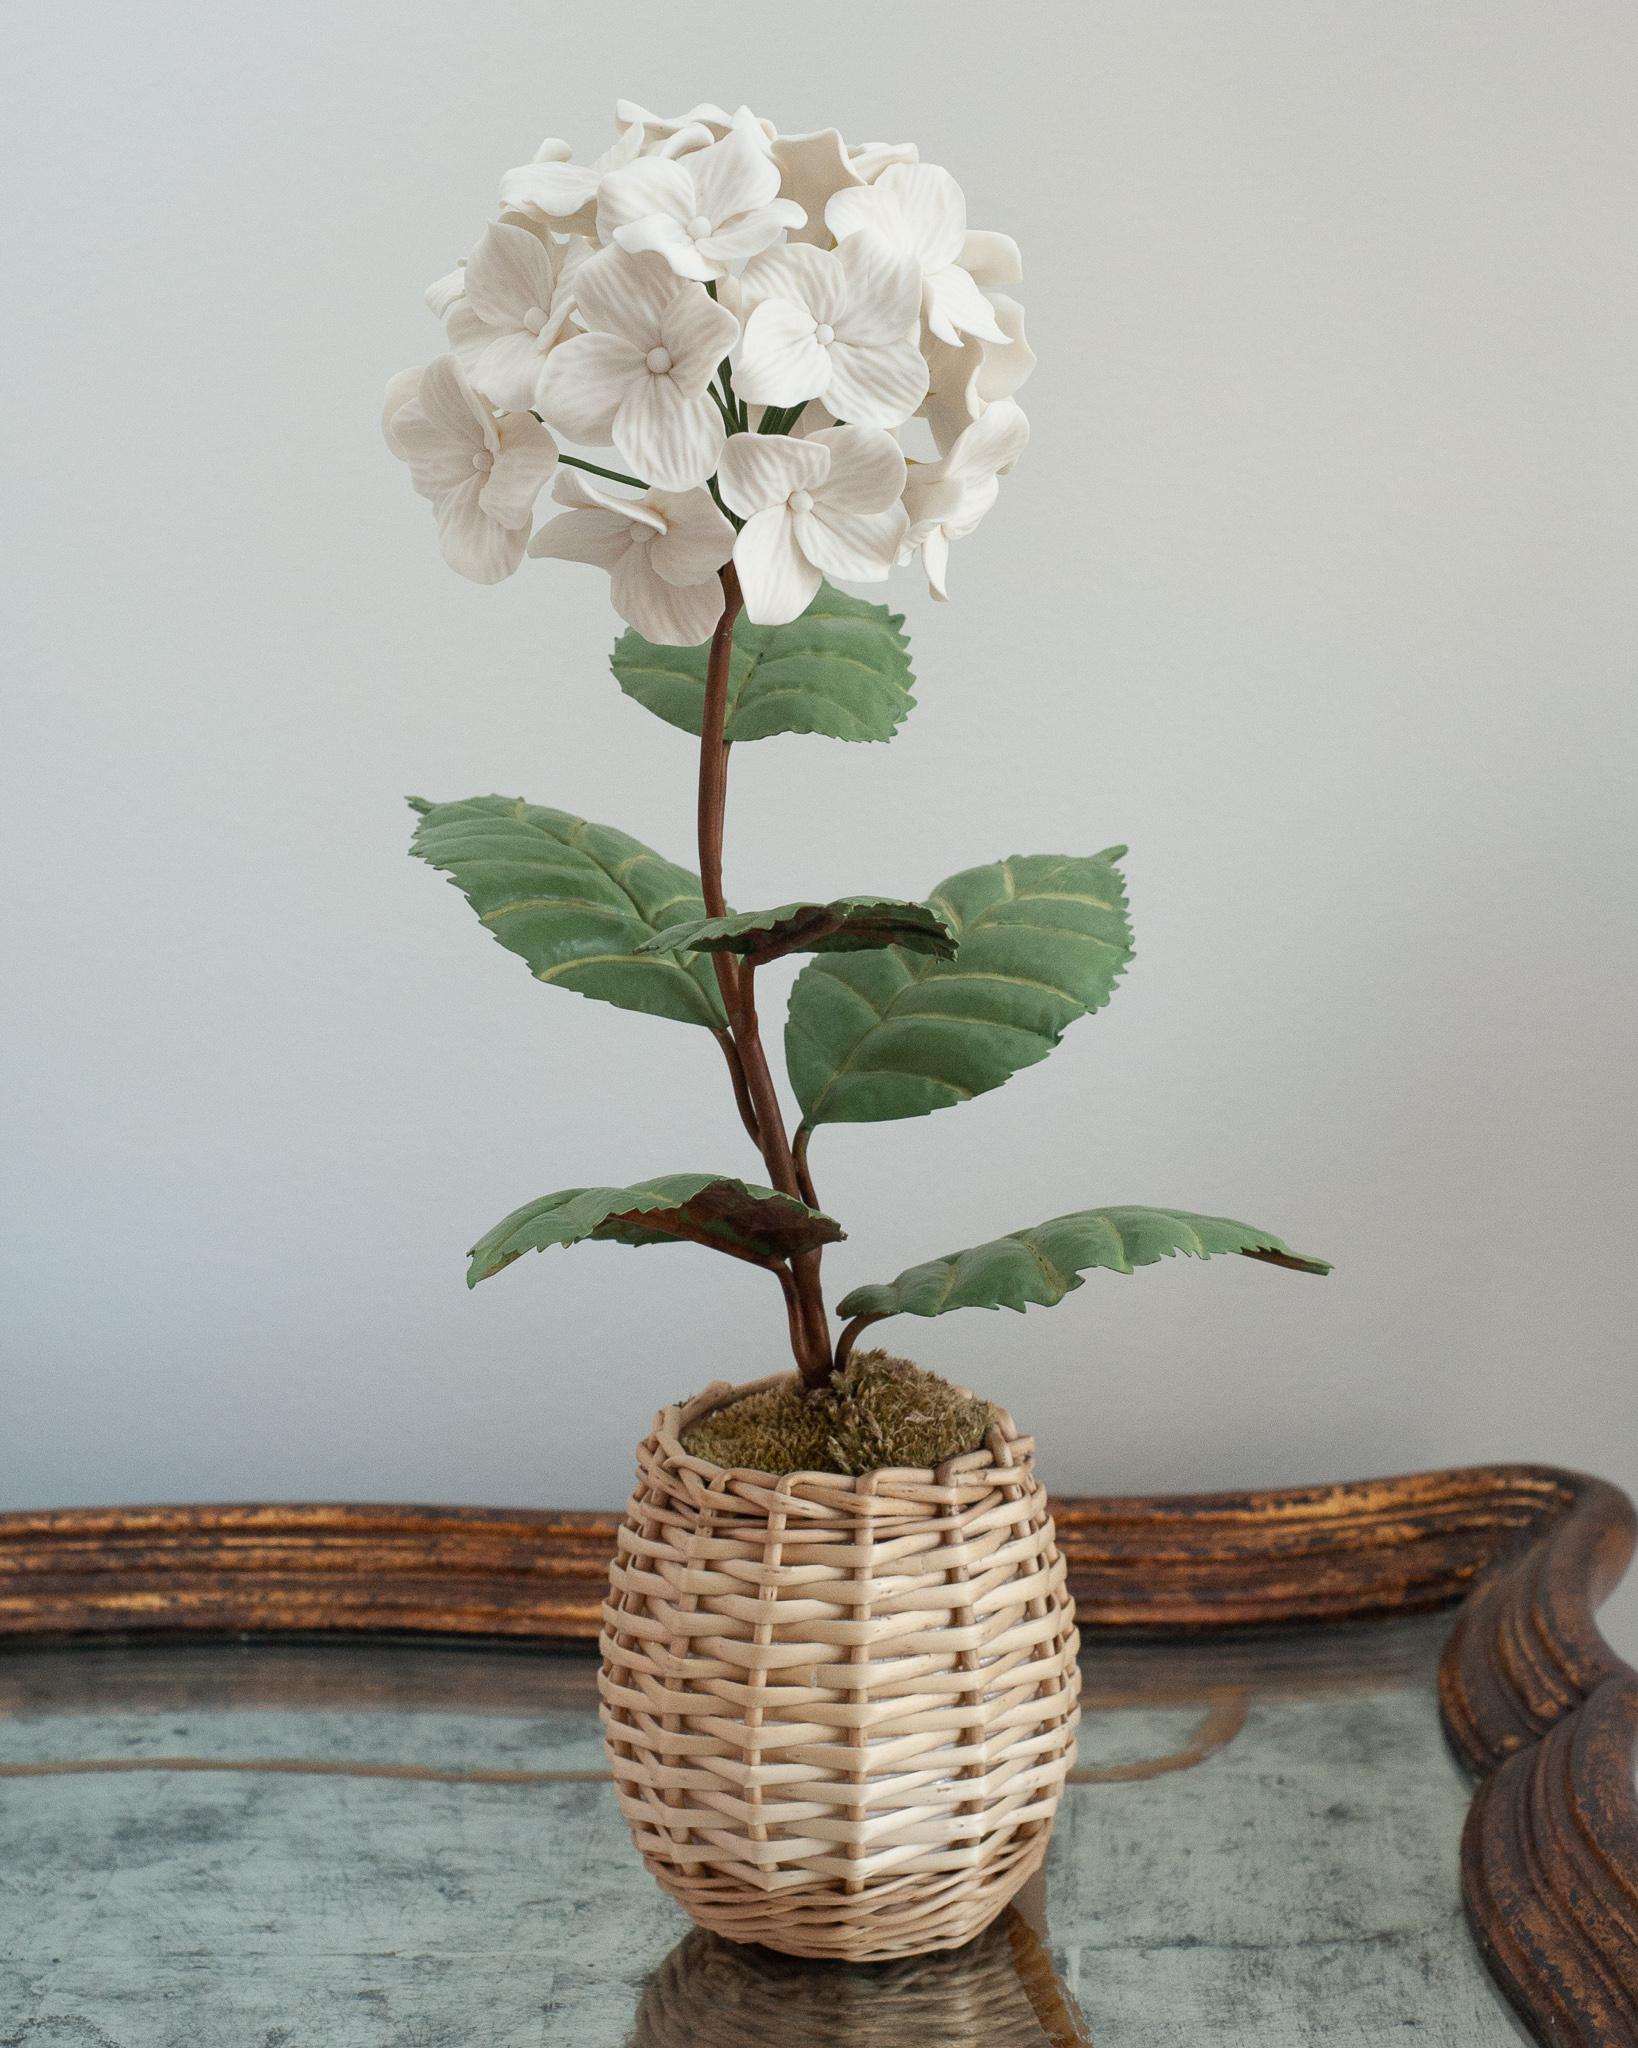 Enhance your table with these delicate porcelain flowers by French artist Samuel Mazy. This white hydrangea is handmade in biscuit porcelain, with handpainted copper leaves and stems, and is placed in a wicker pot. 
An exclusive floral collection